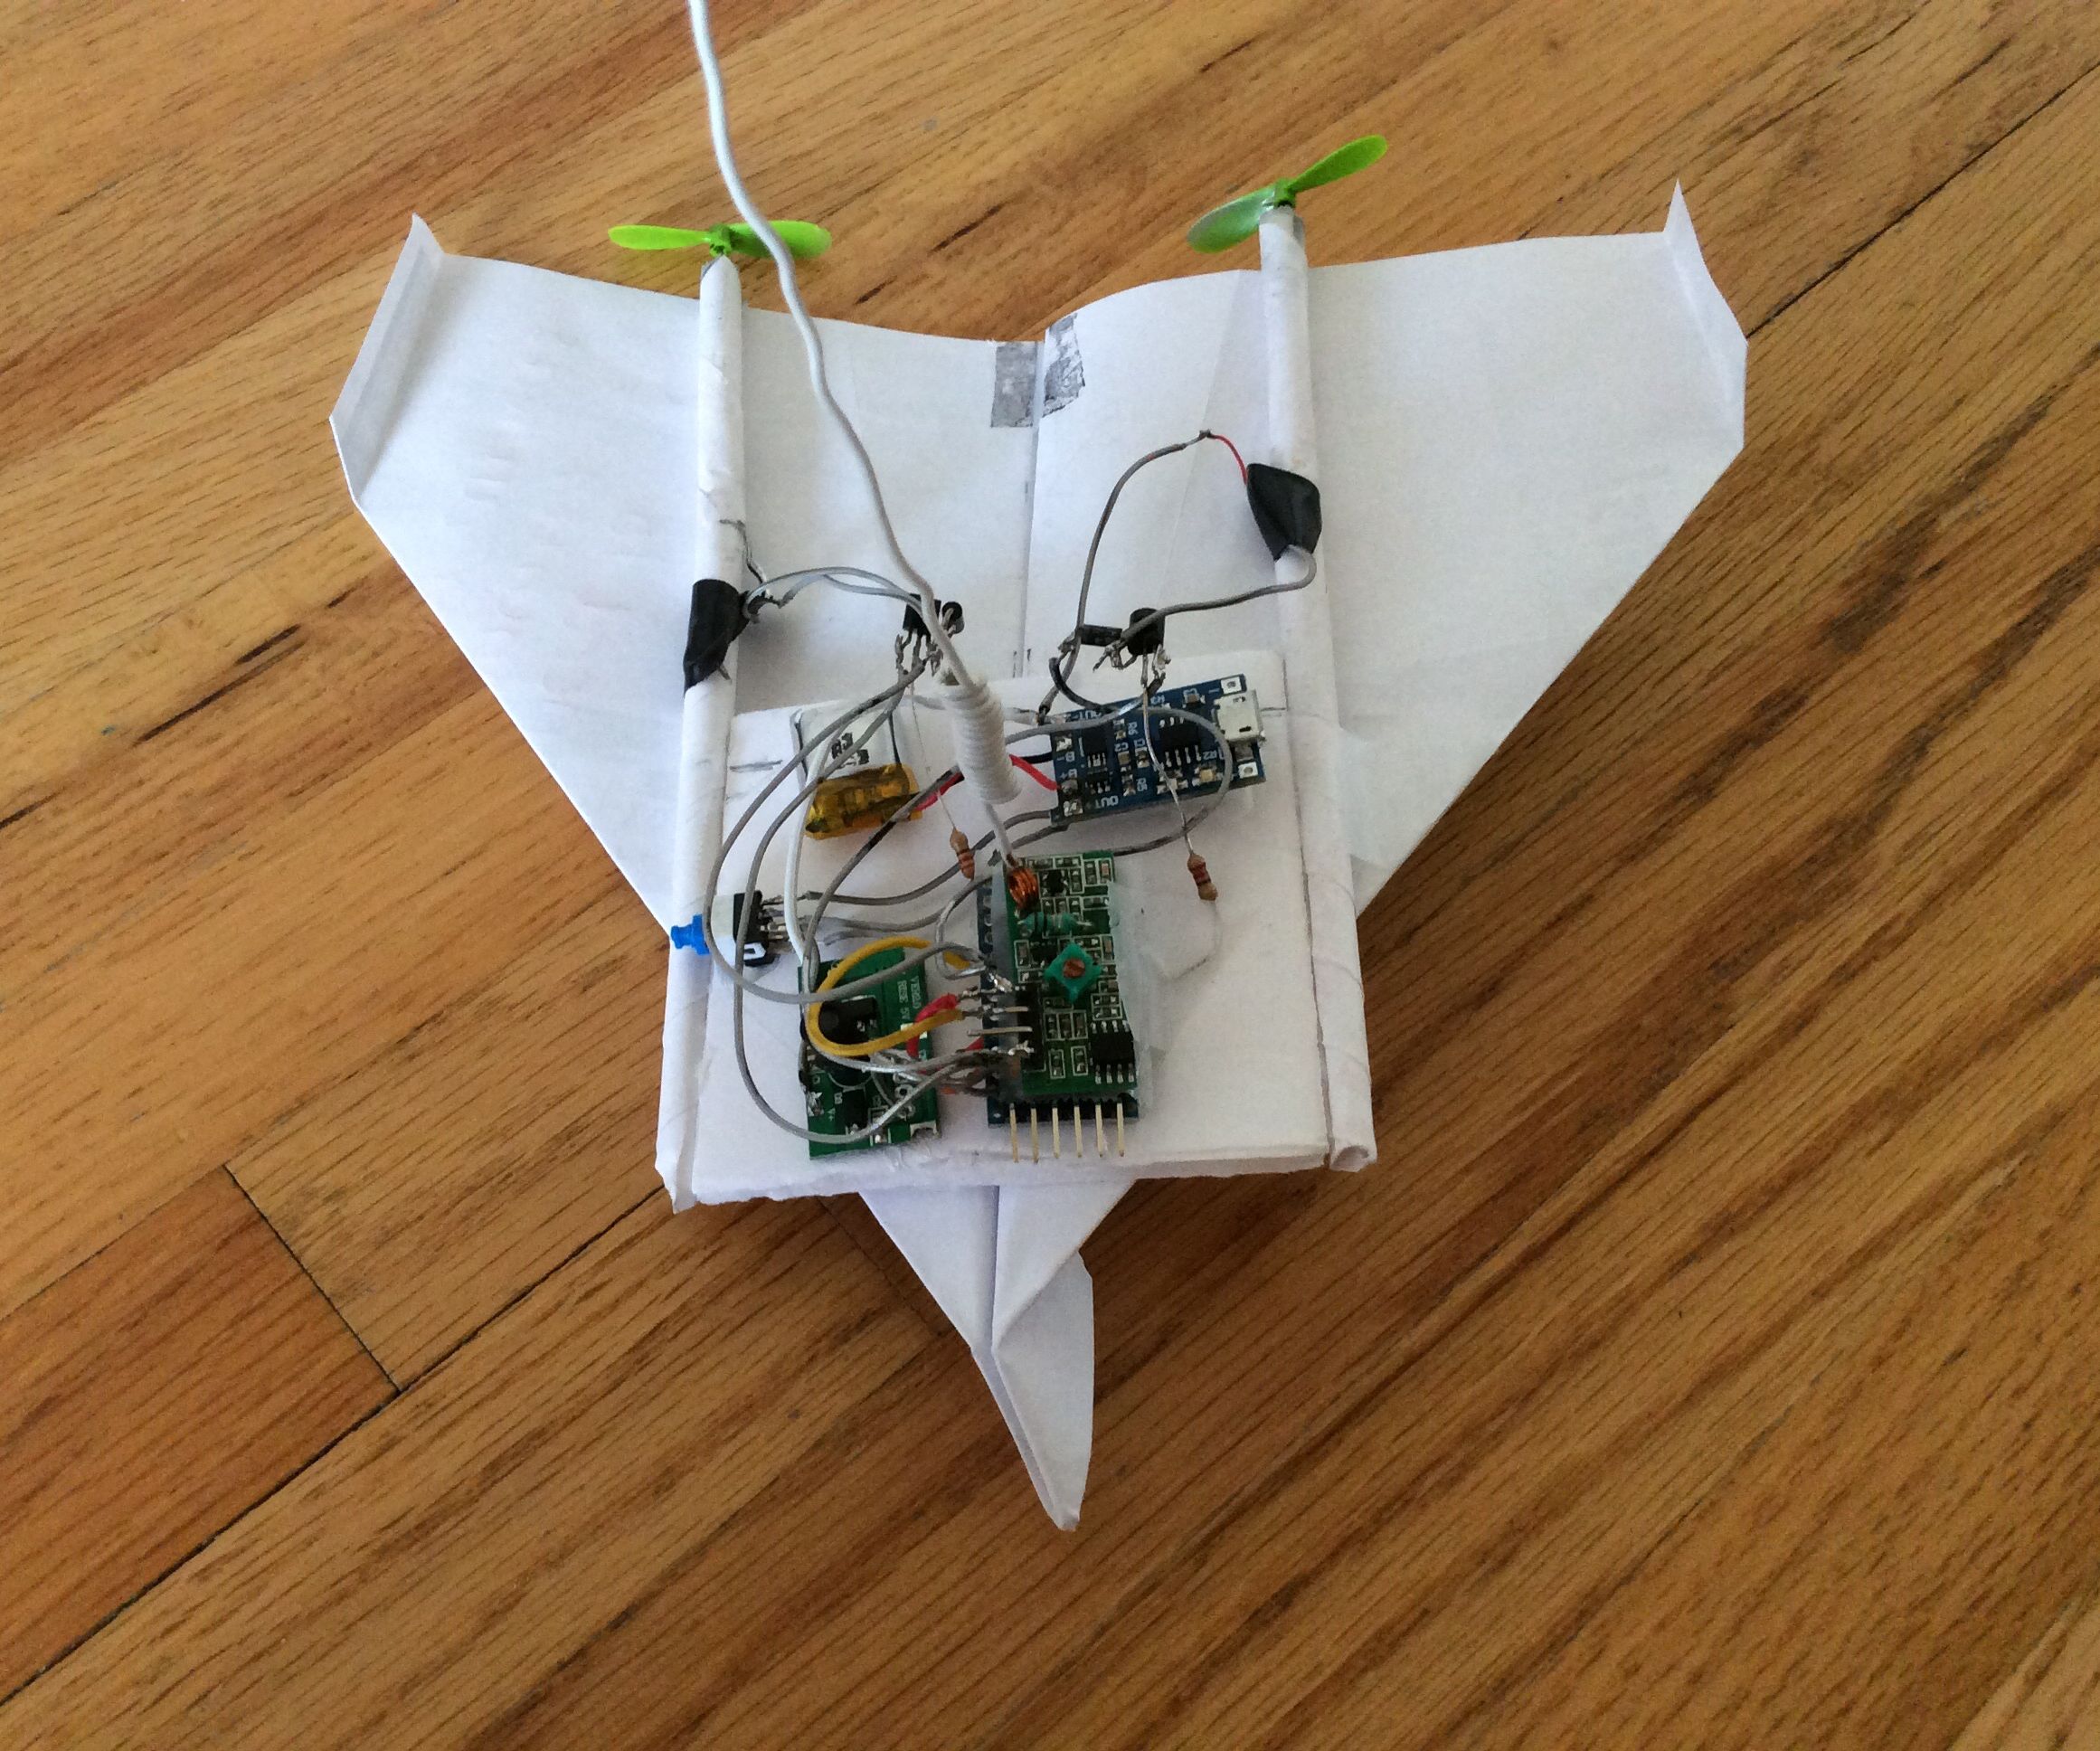 How to Make a Radio Controlled Paper Plane (and Learn About Electronics As Well)